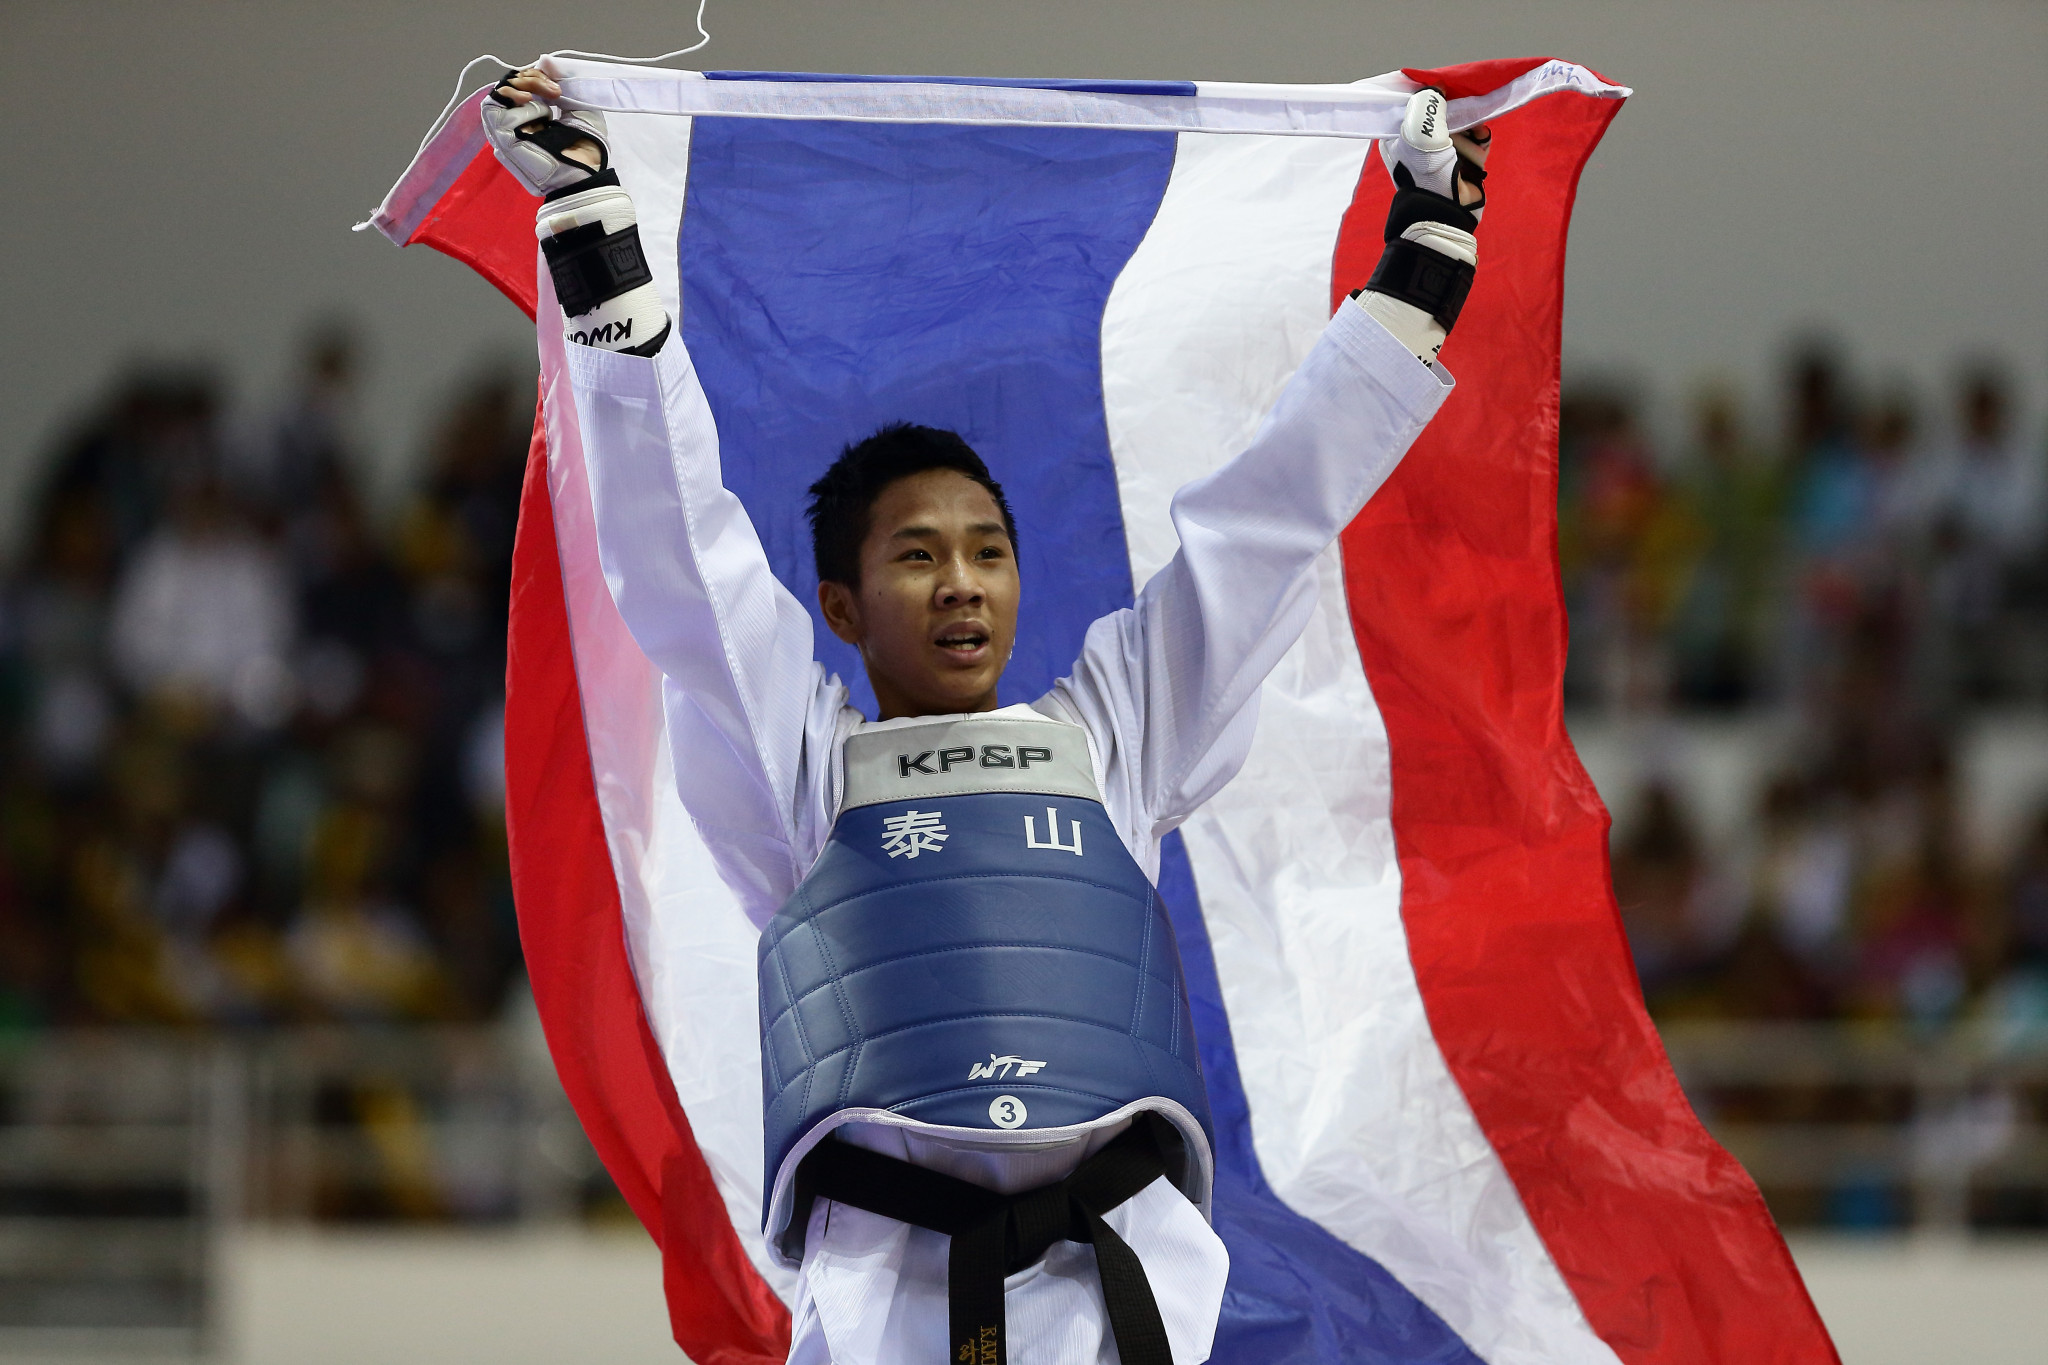 Ramnarong Sawekwiharee secured his Olympic spot today in the men's under-58kg ©Getty Images